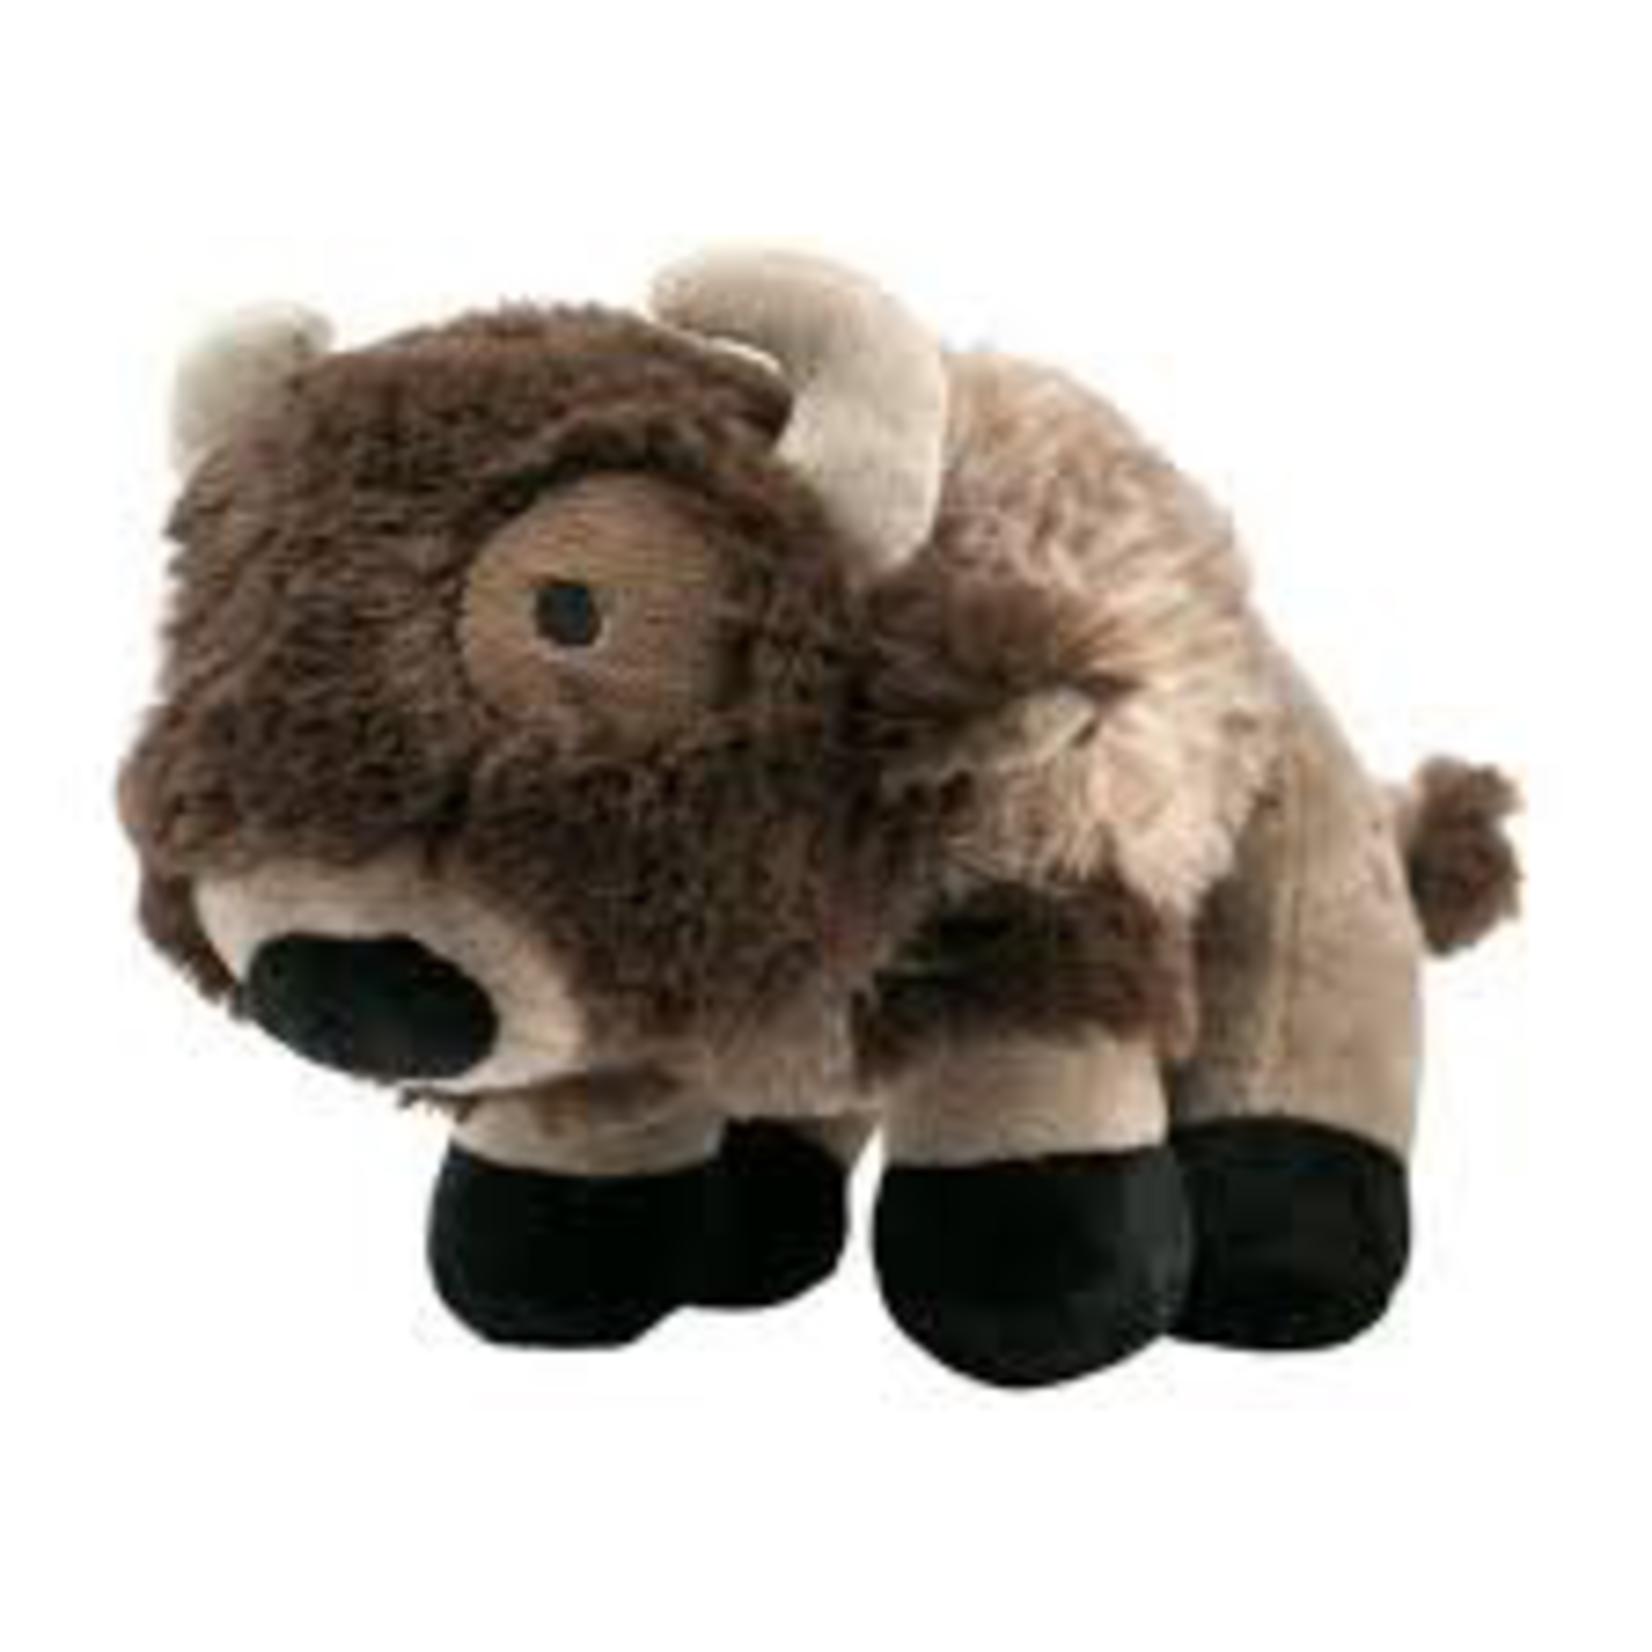 Tall Tails Tall Tails Buffalo with Squeaker Toy 9"